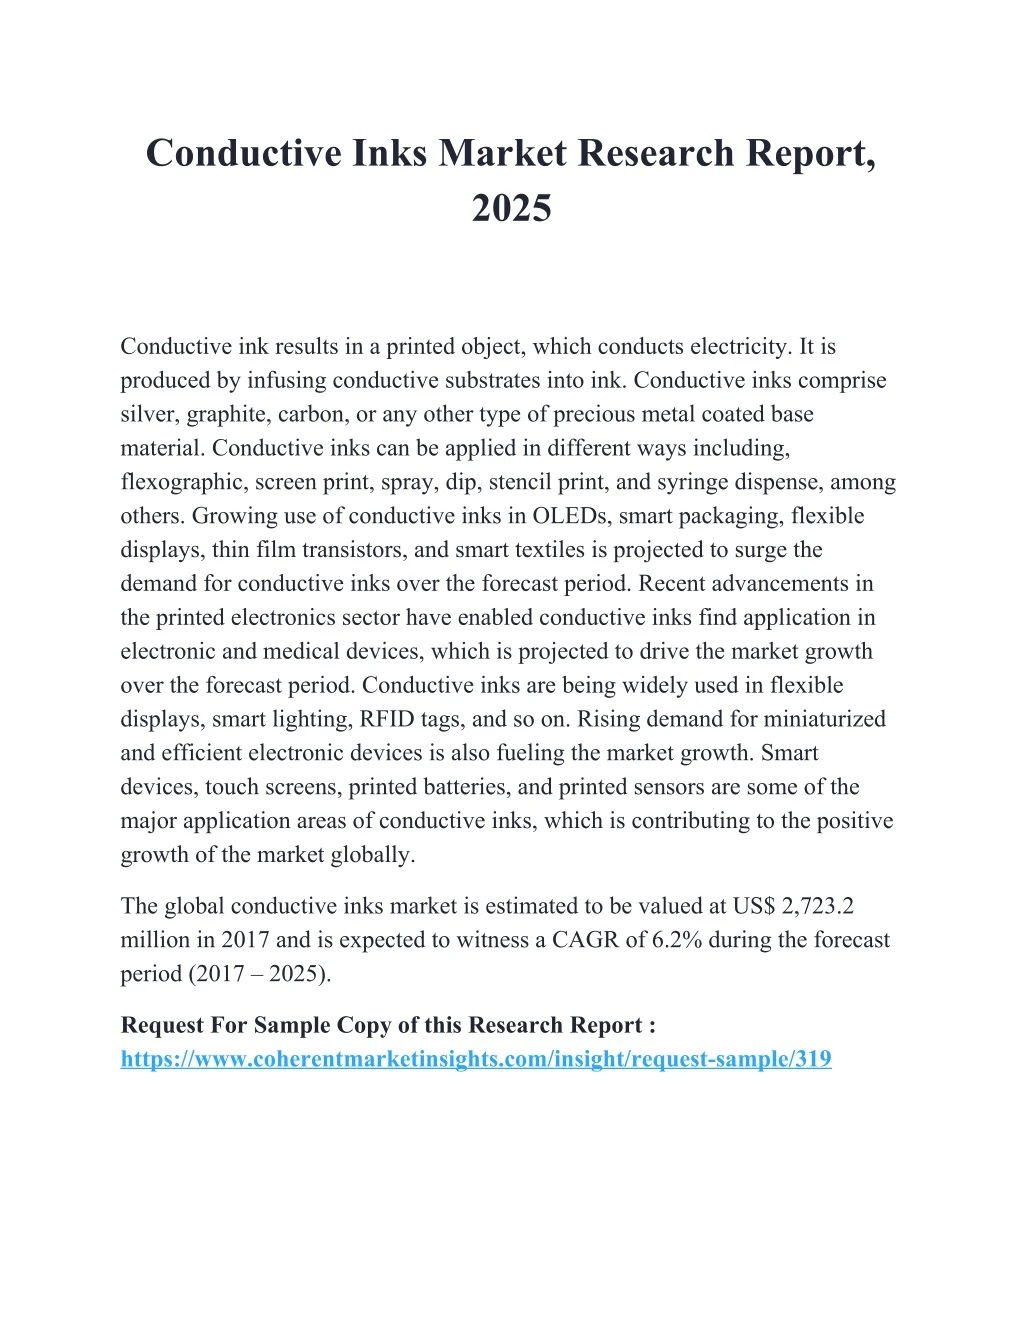 conductive inks market research report 2025